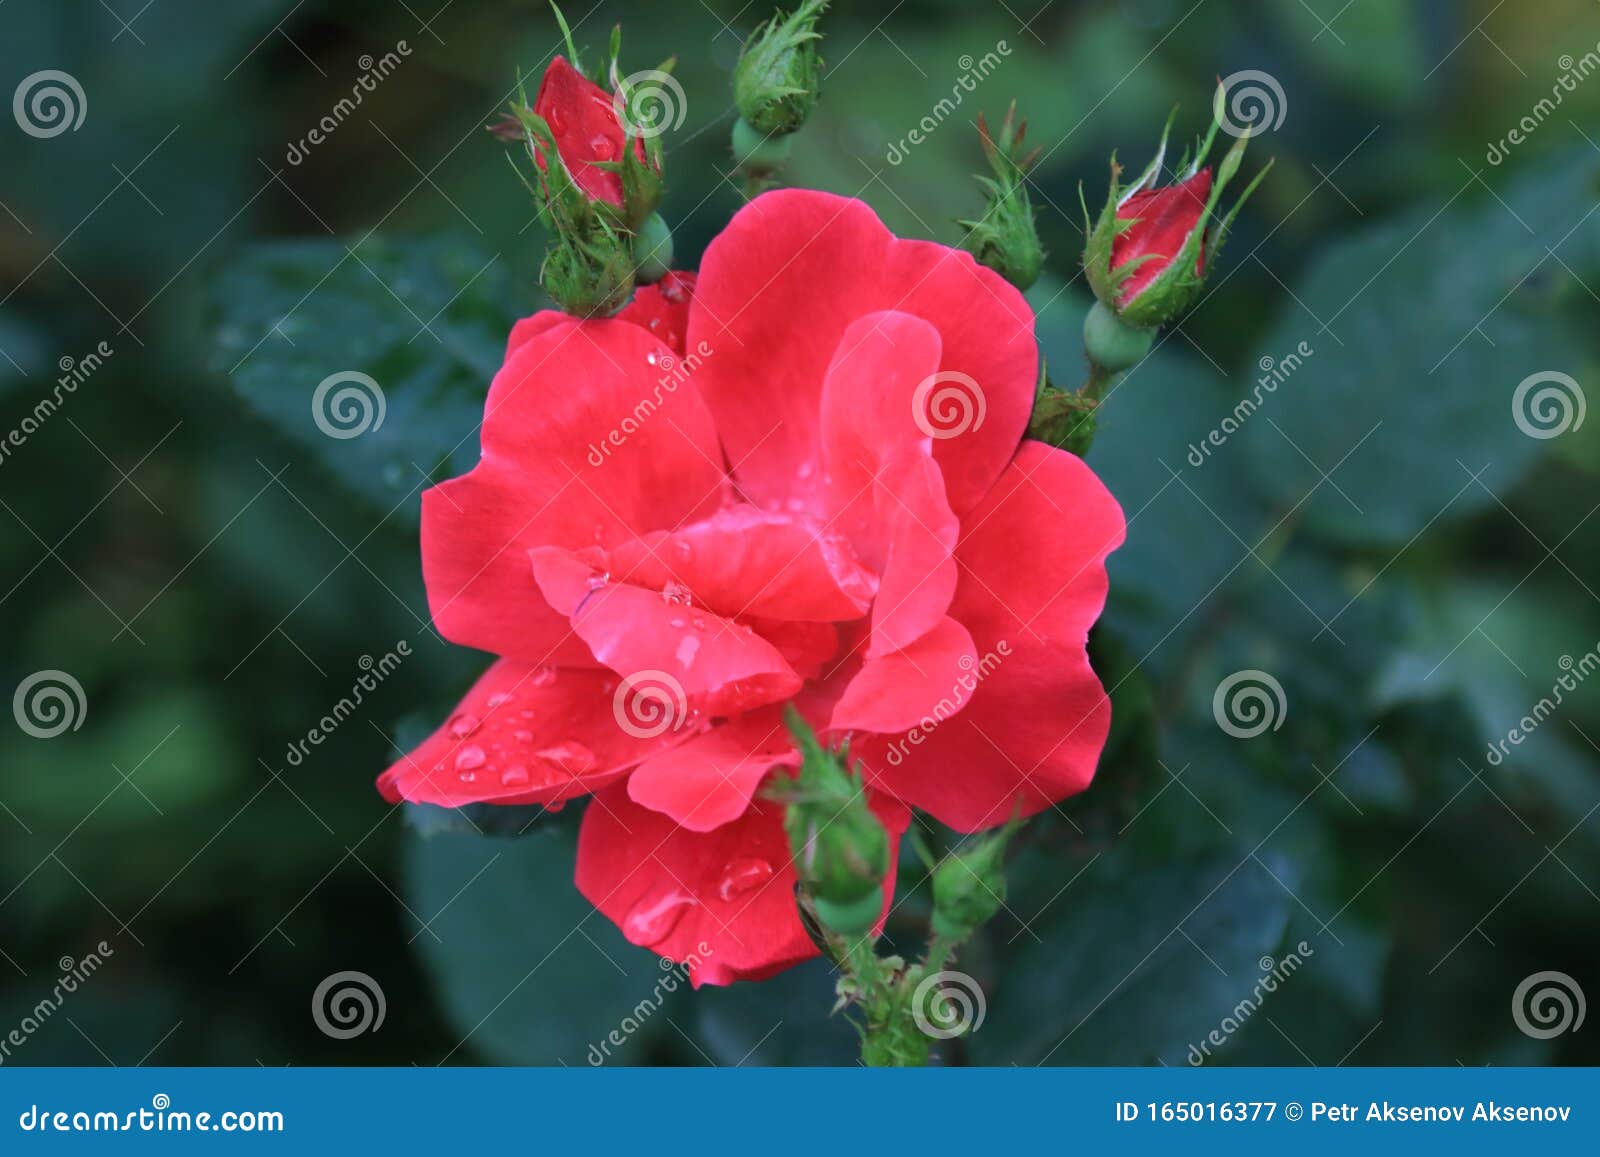 Beautiful Red Rose With Transparent Raindrops Stock Image Image Of Petals Flowers 165016377